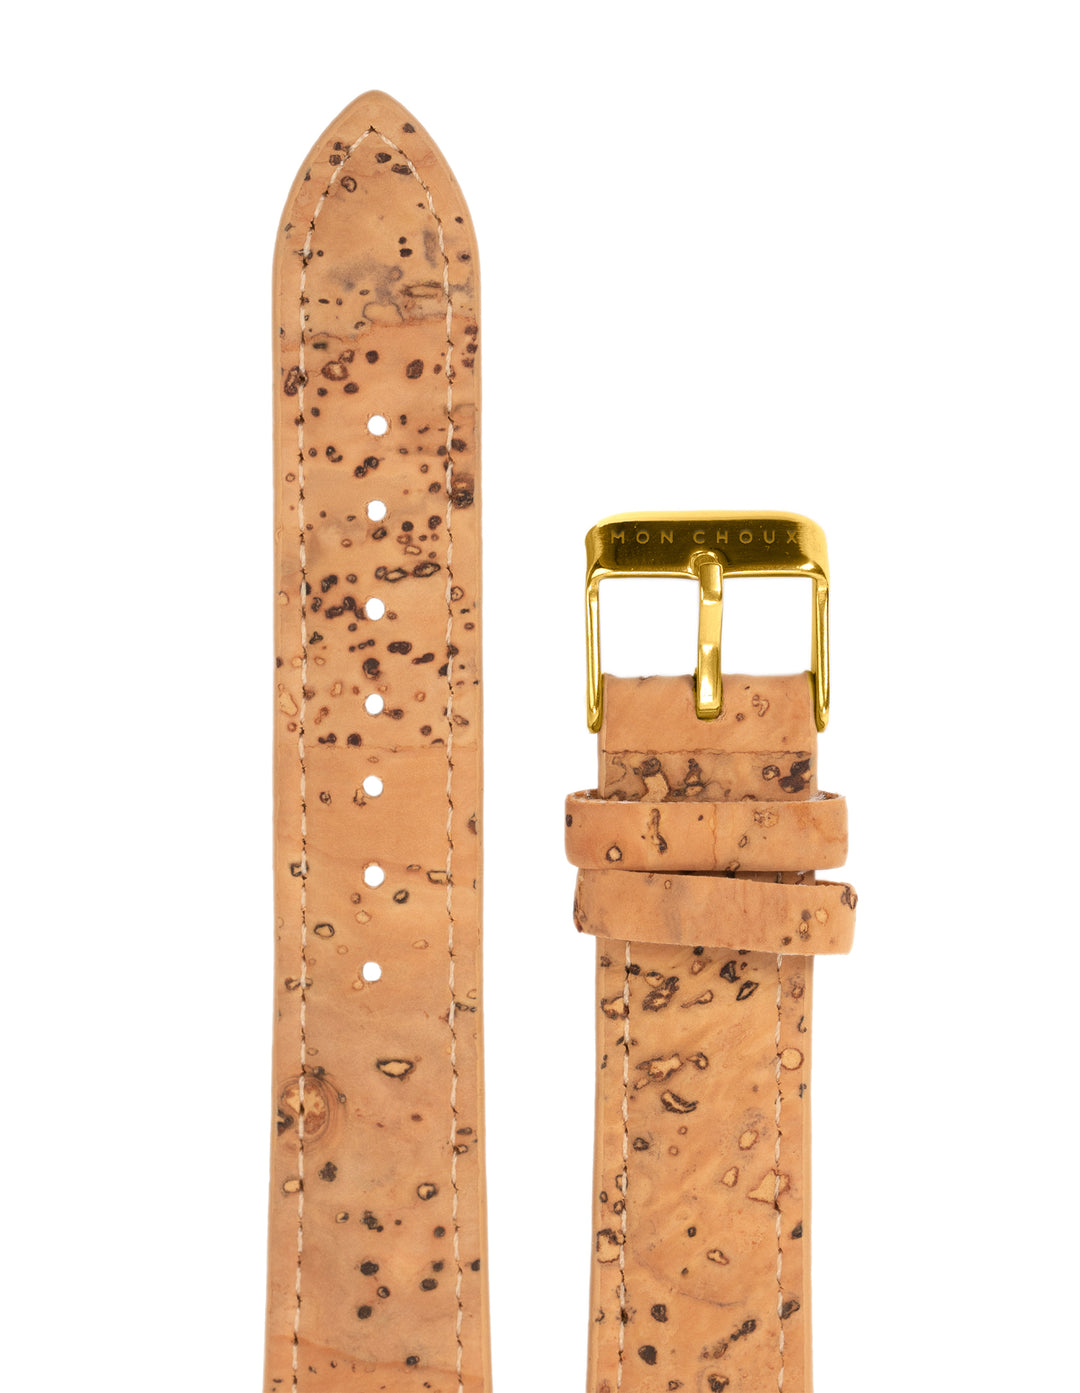 WATCH STRAP - NATURAL VEGAN LEATHER - GOLD BUCKLE | CORK